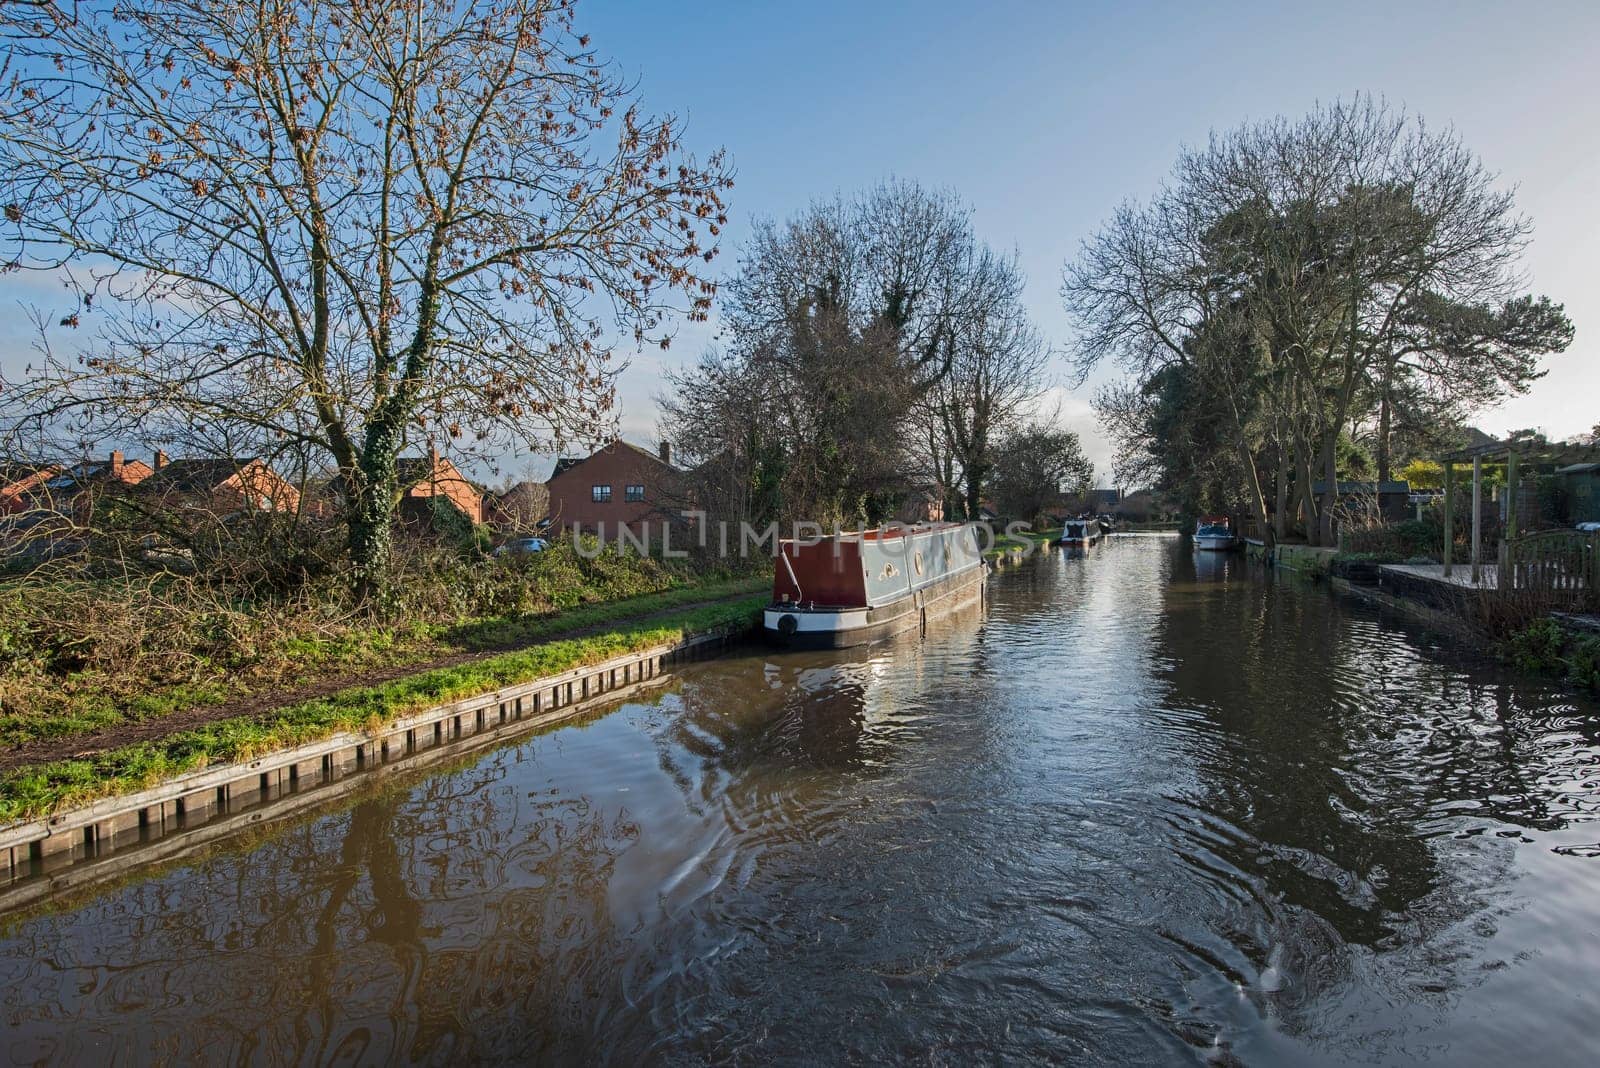 View from a narrowboat travelling in English urban village scenery on British waterway canal with moored boat